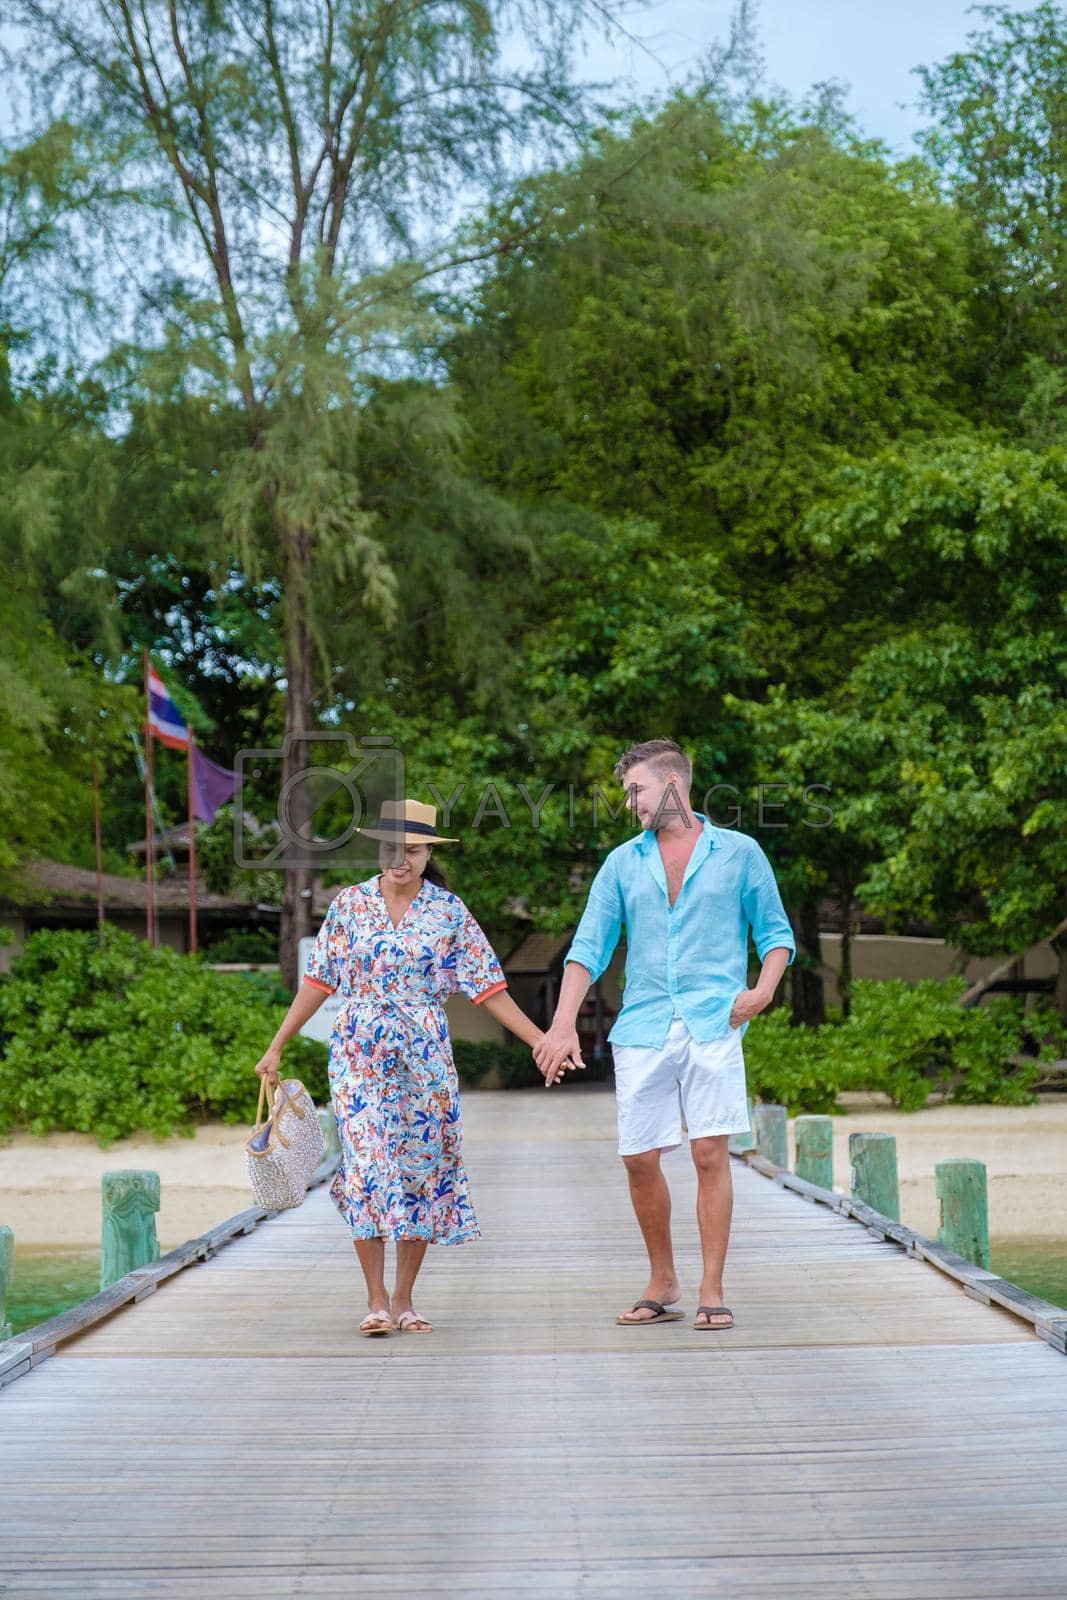 Royalty free image of couple men and woman on a tropical isalnd with wooden pier jetty, by fokkebok